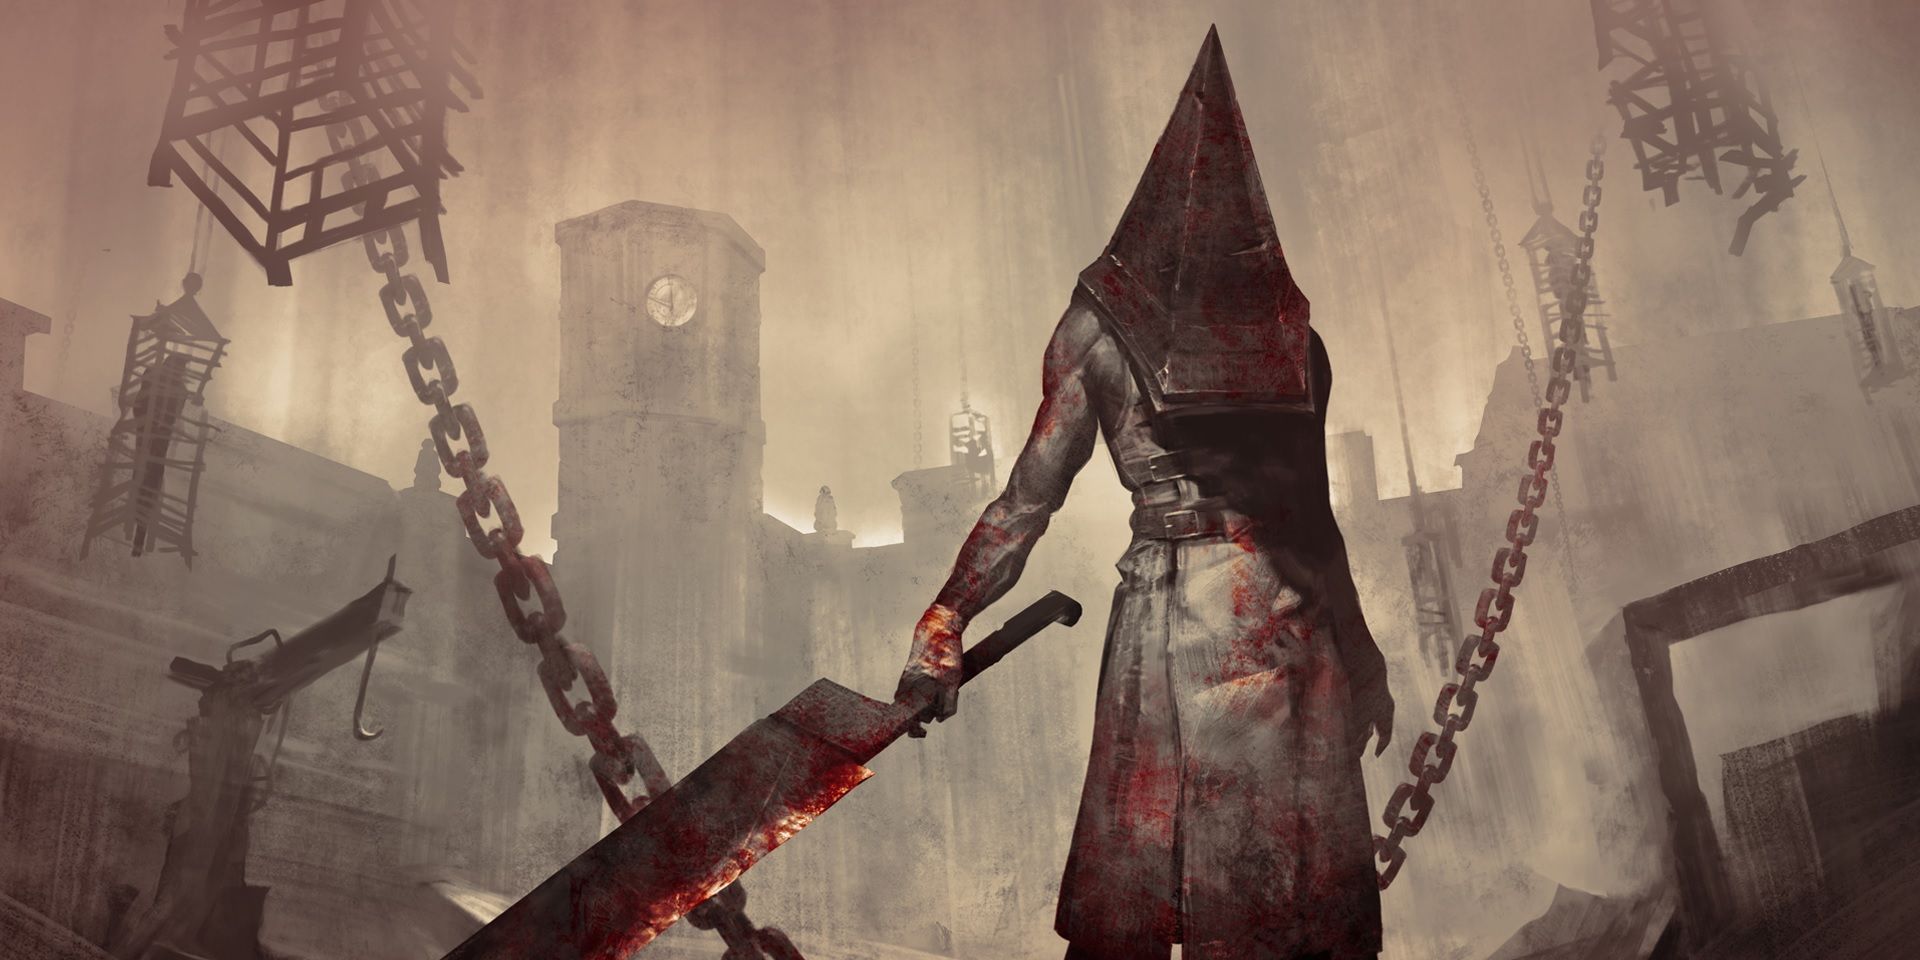 Pyramid Head from the Silent Hill franchise.